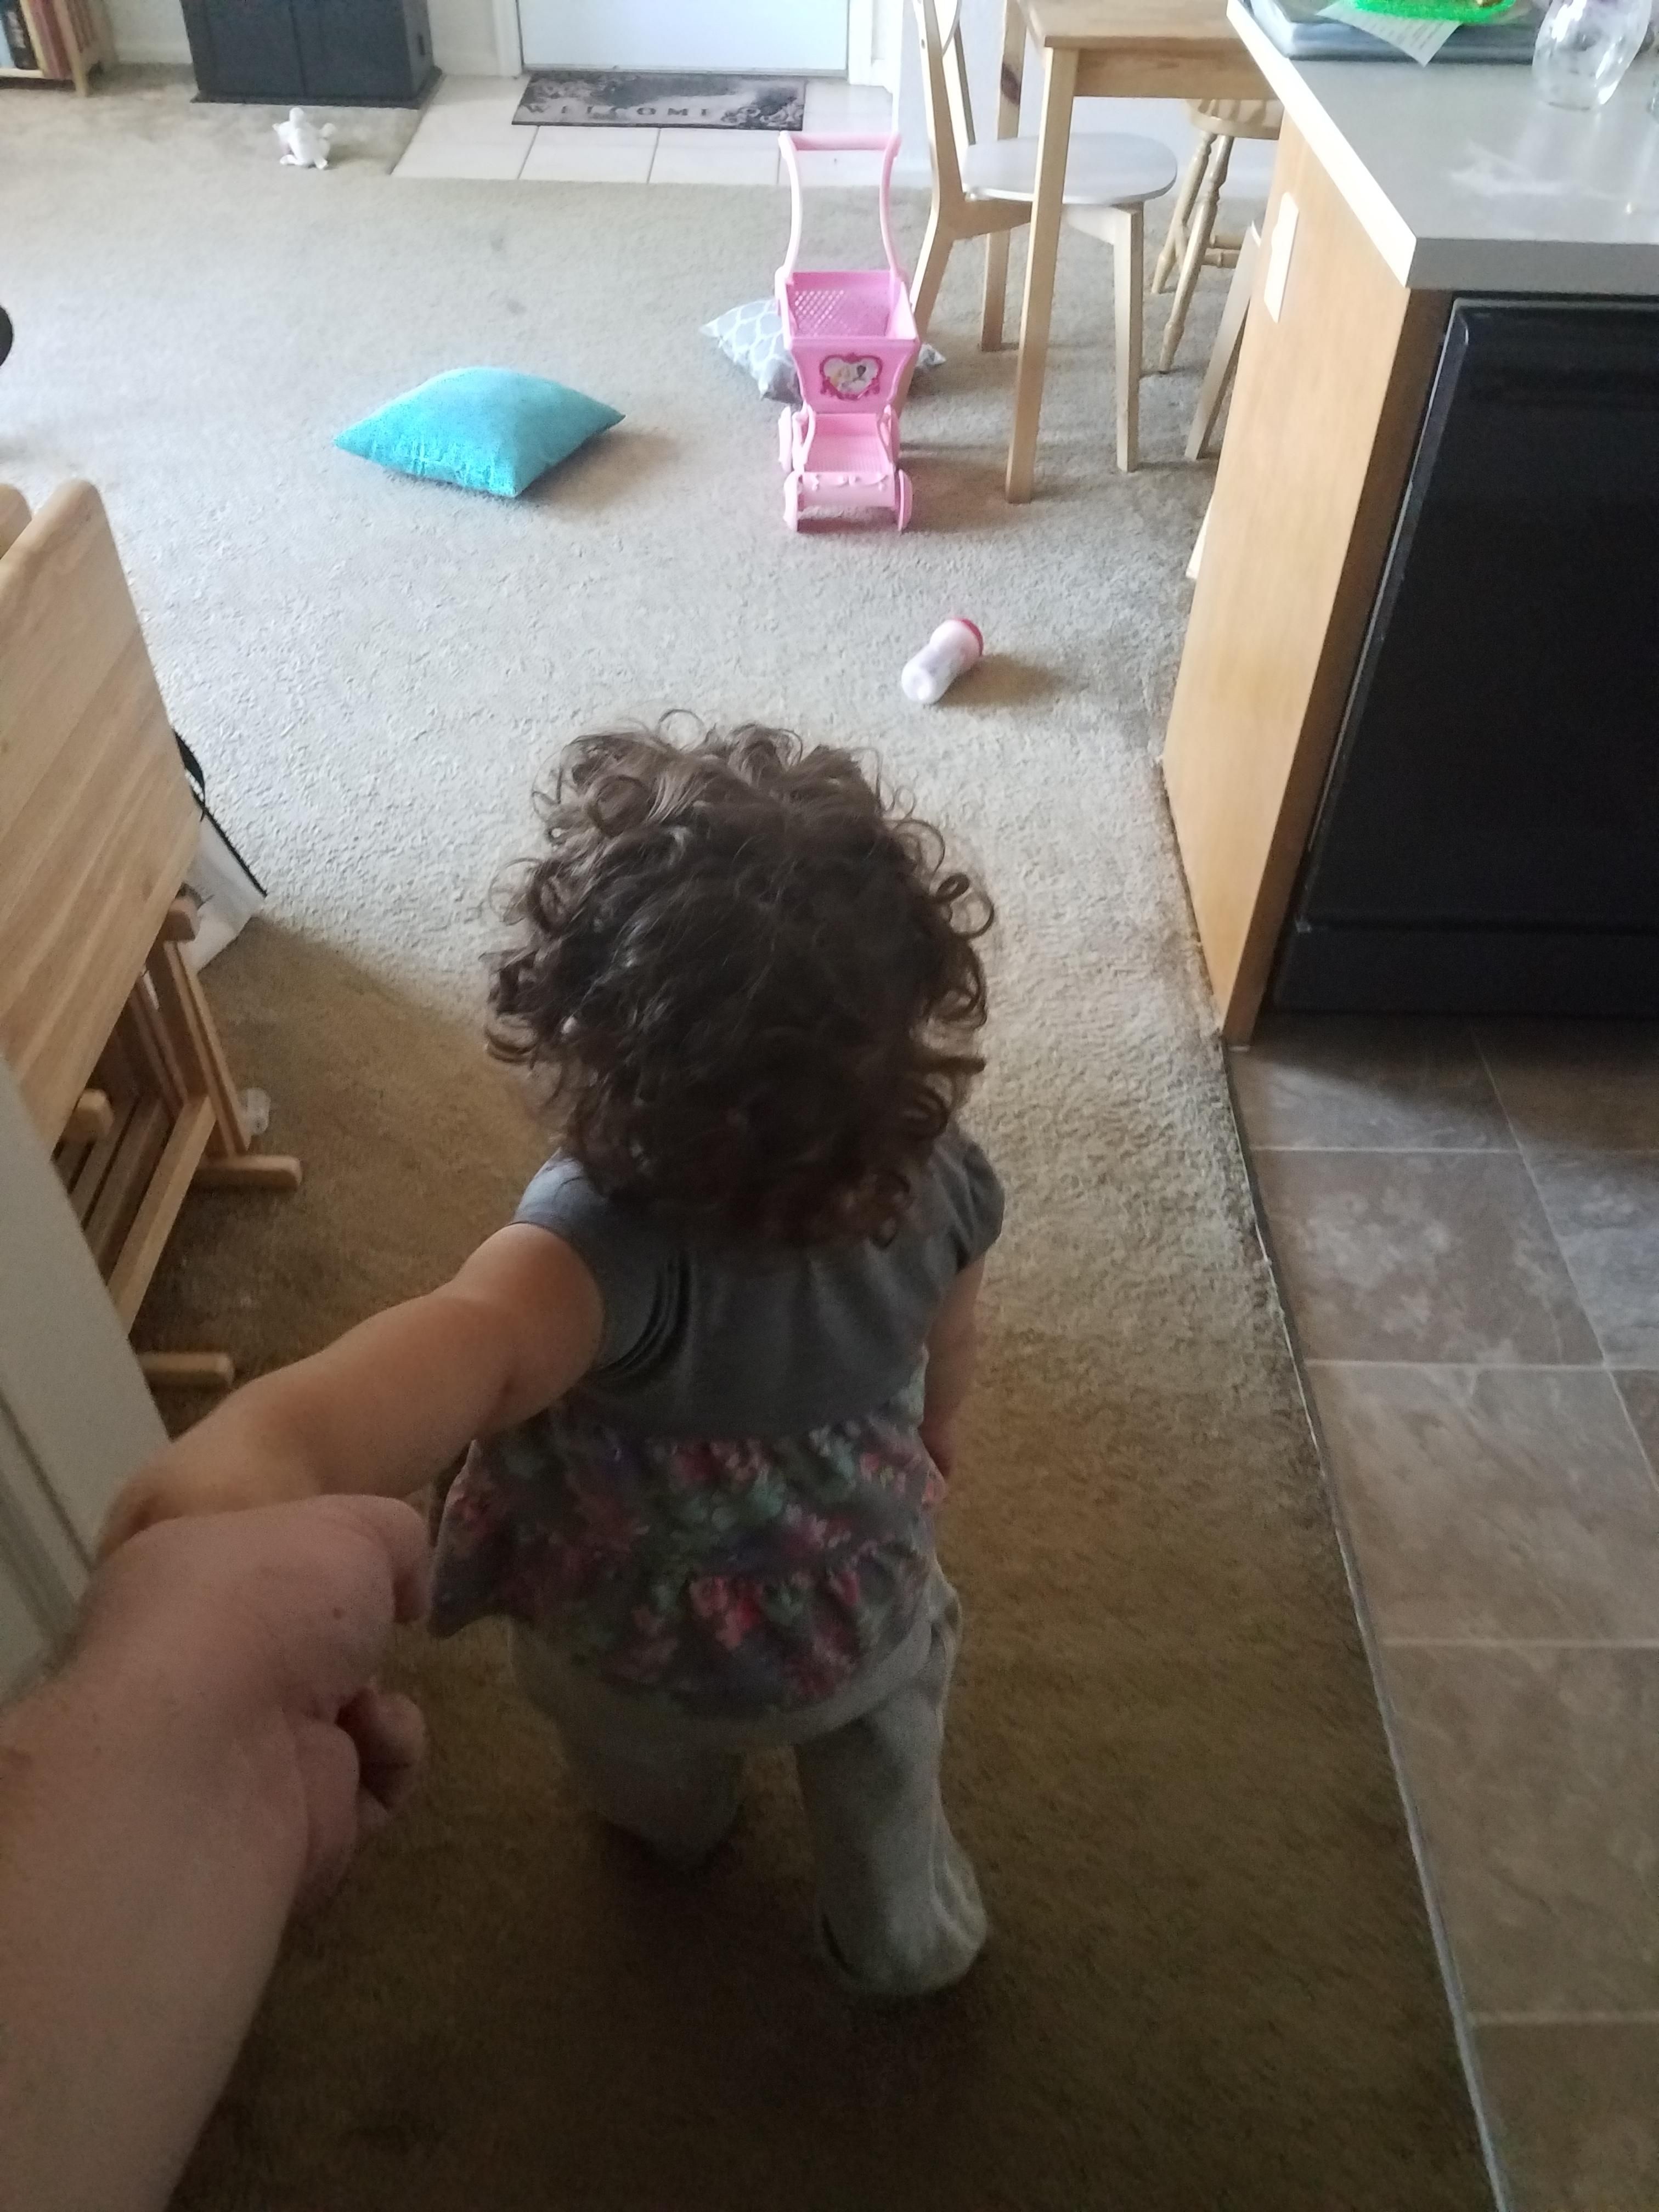 My life is like those famous pictures. Only instead of a girlfriend leading me to exotic places it's just my 3-year-old taking me to open doors for her.